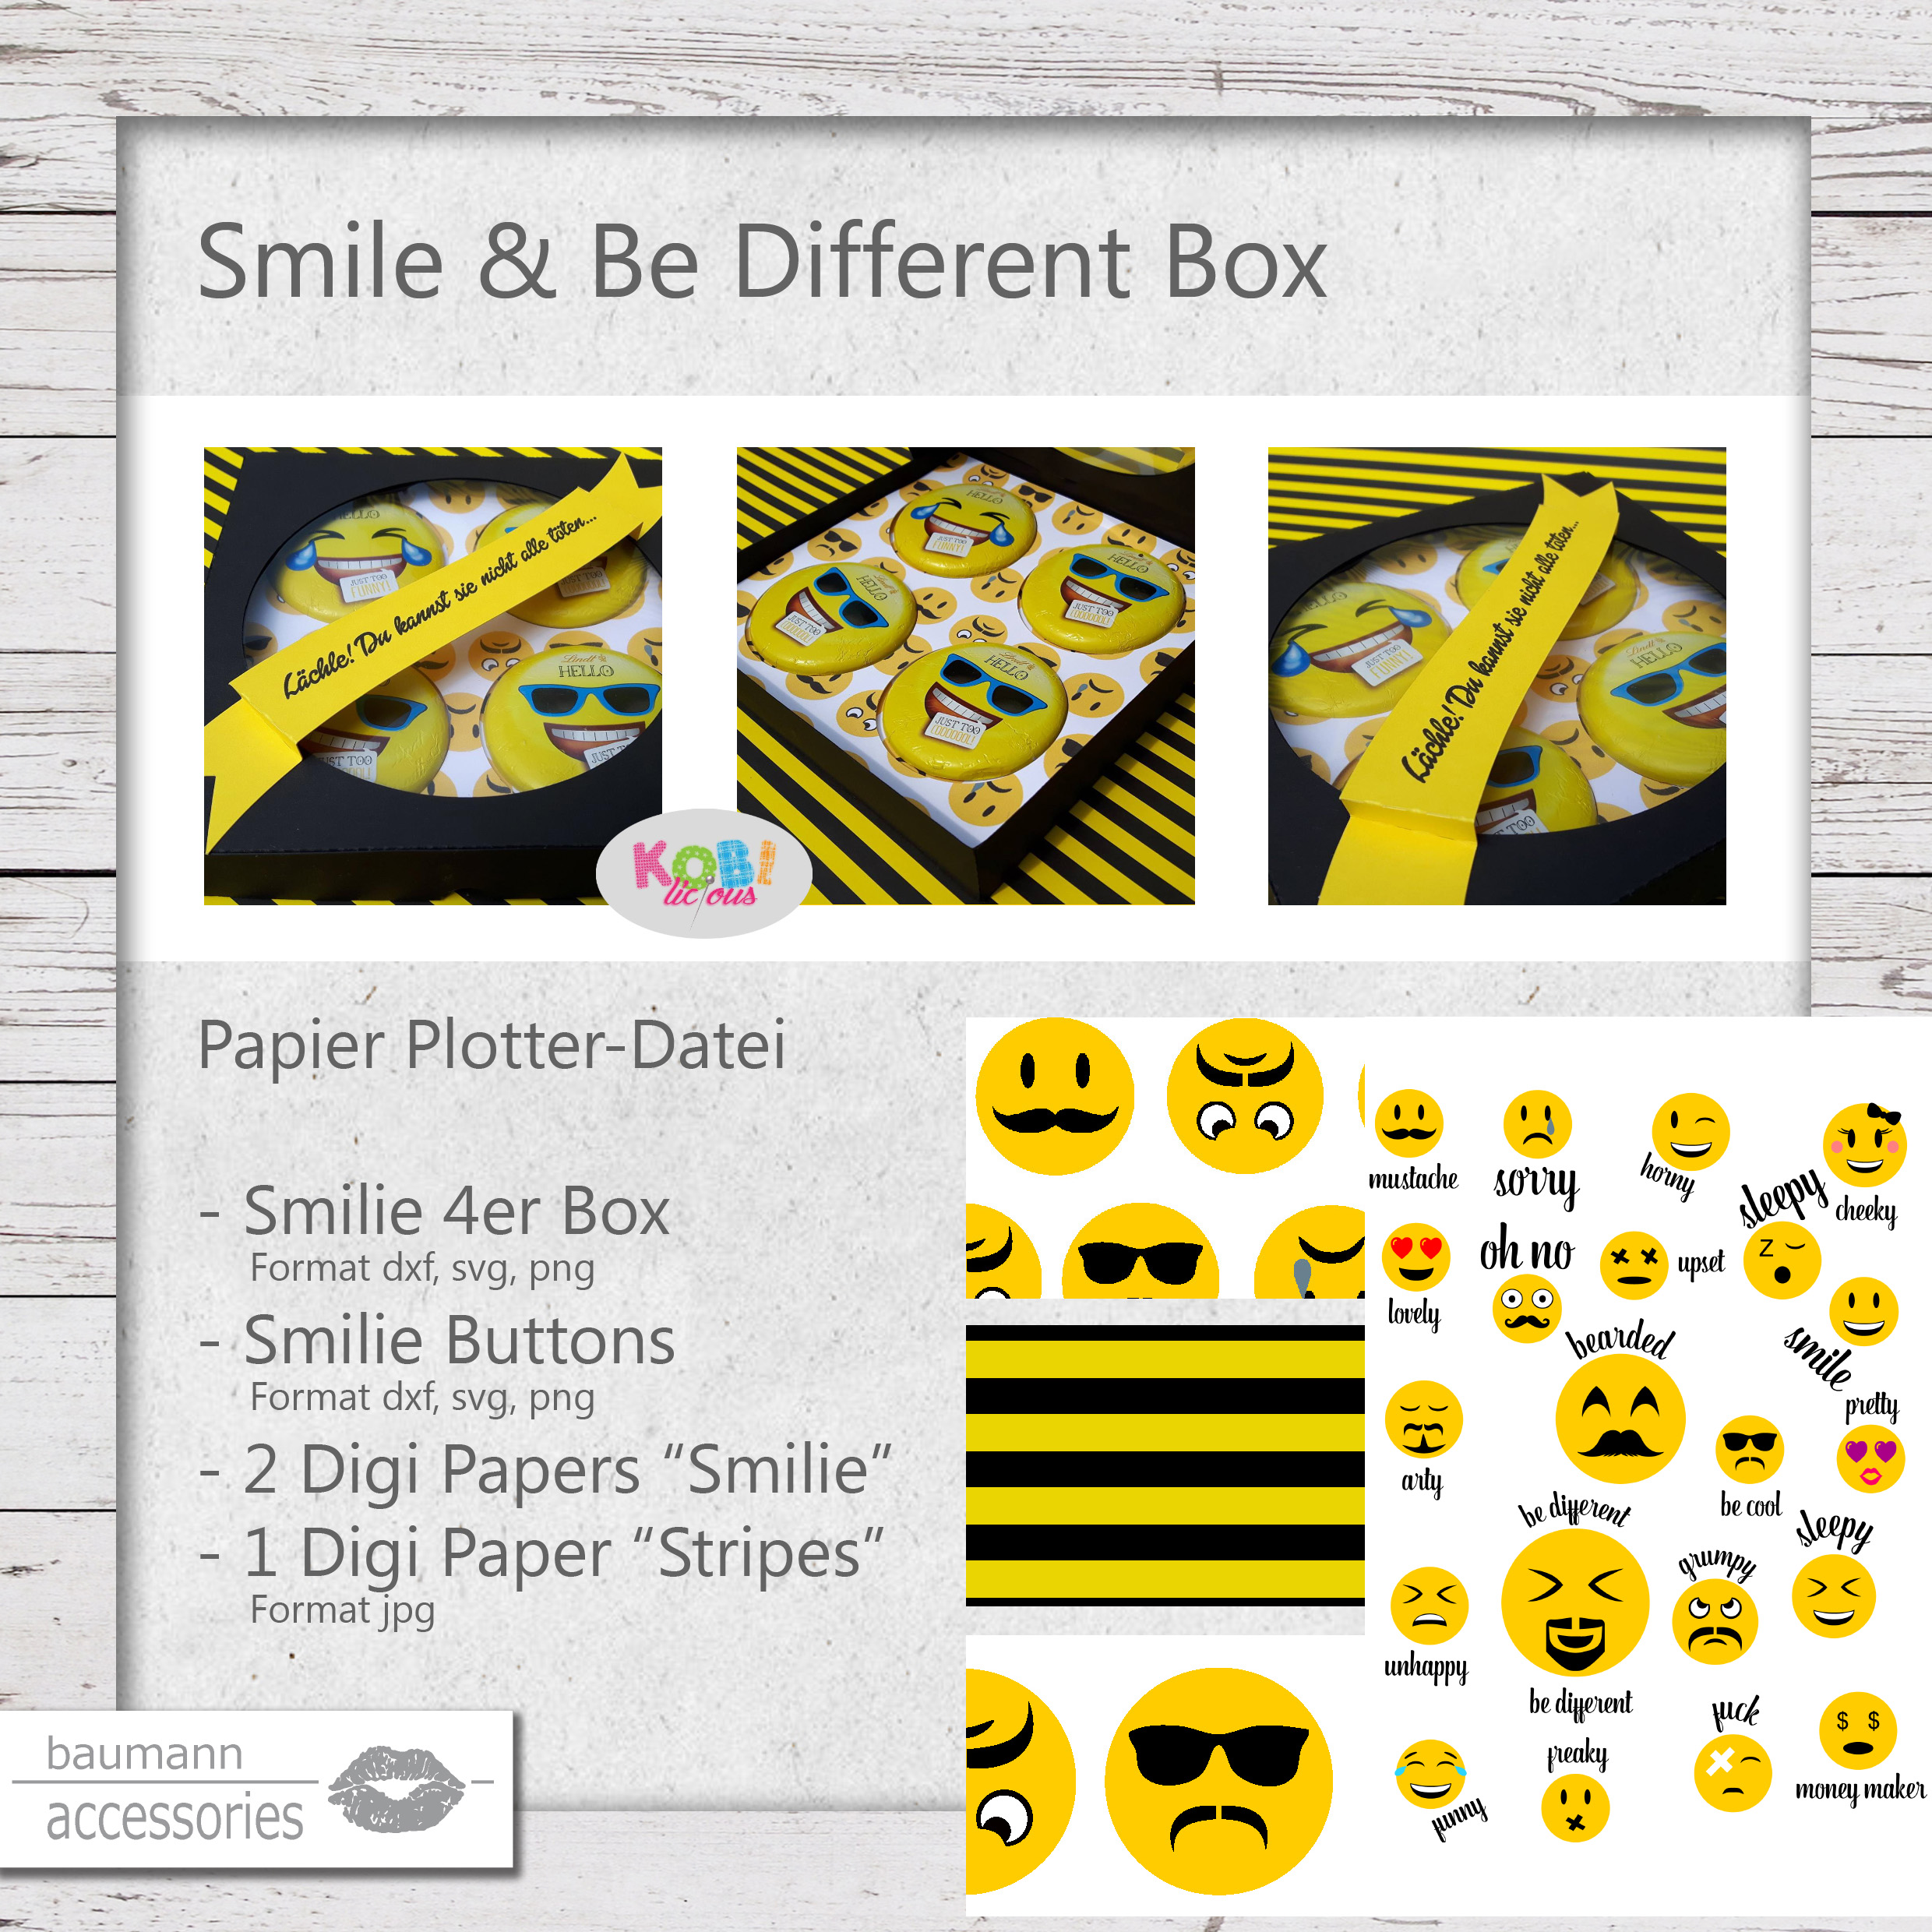 Produkt Smile & Be Different Box